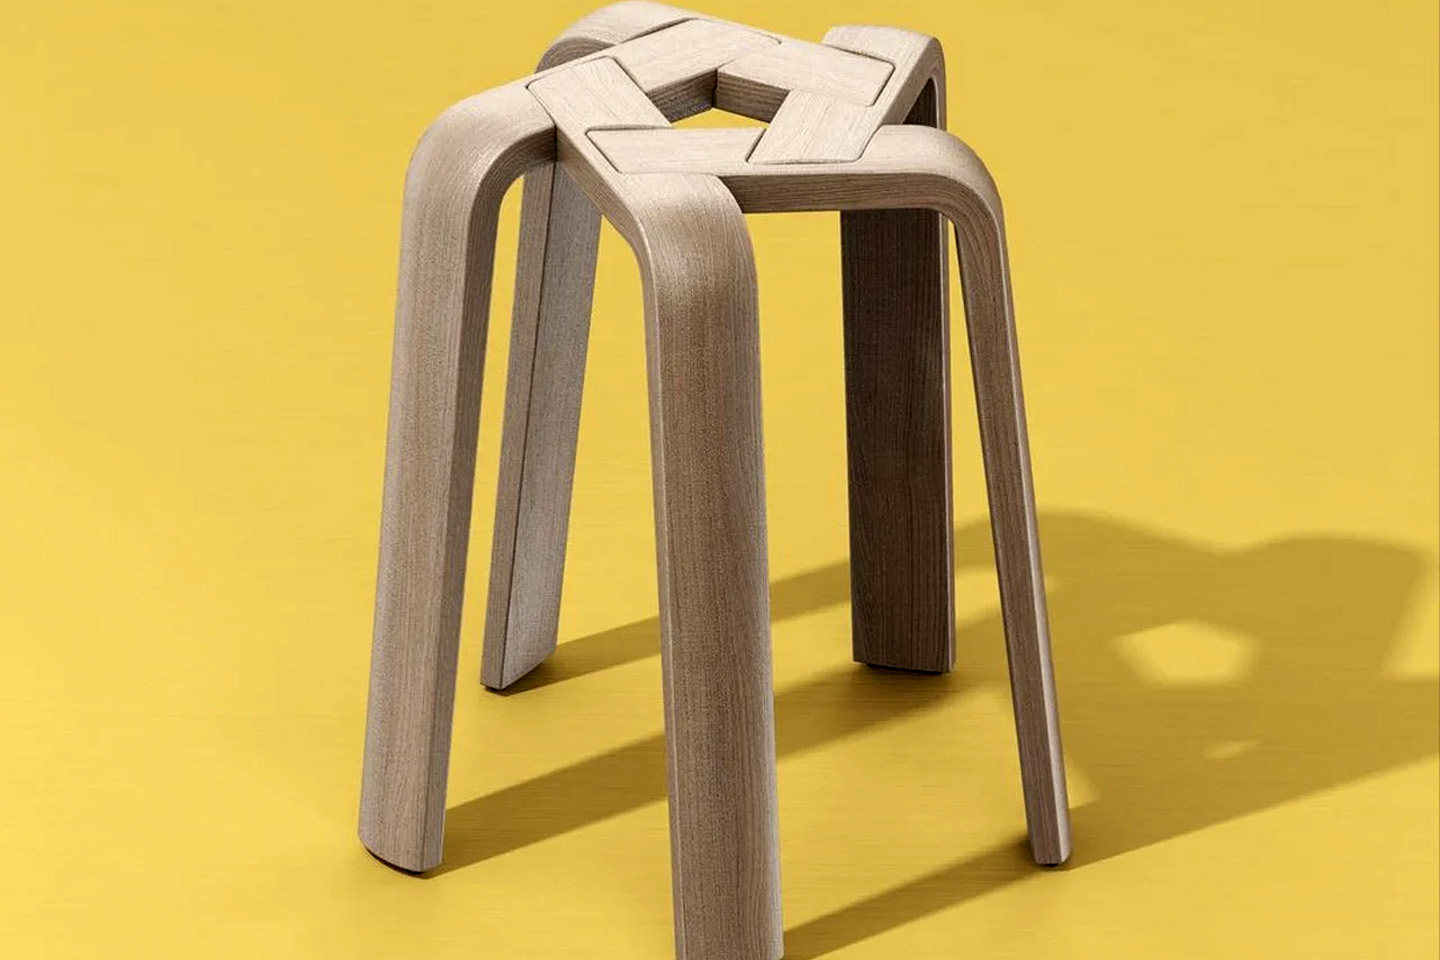 Top 5 stool designs to replace your traditional chairs